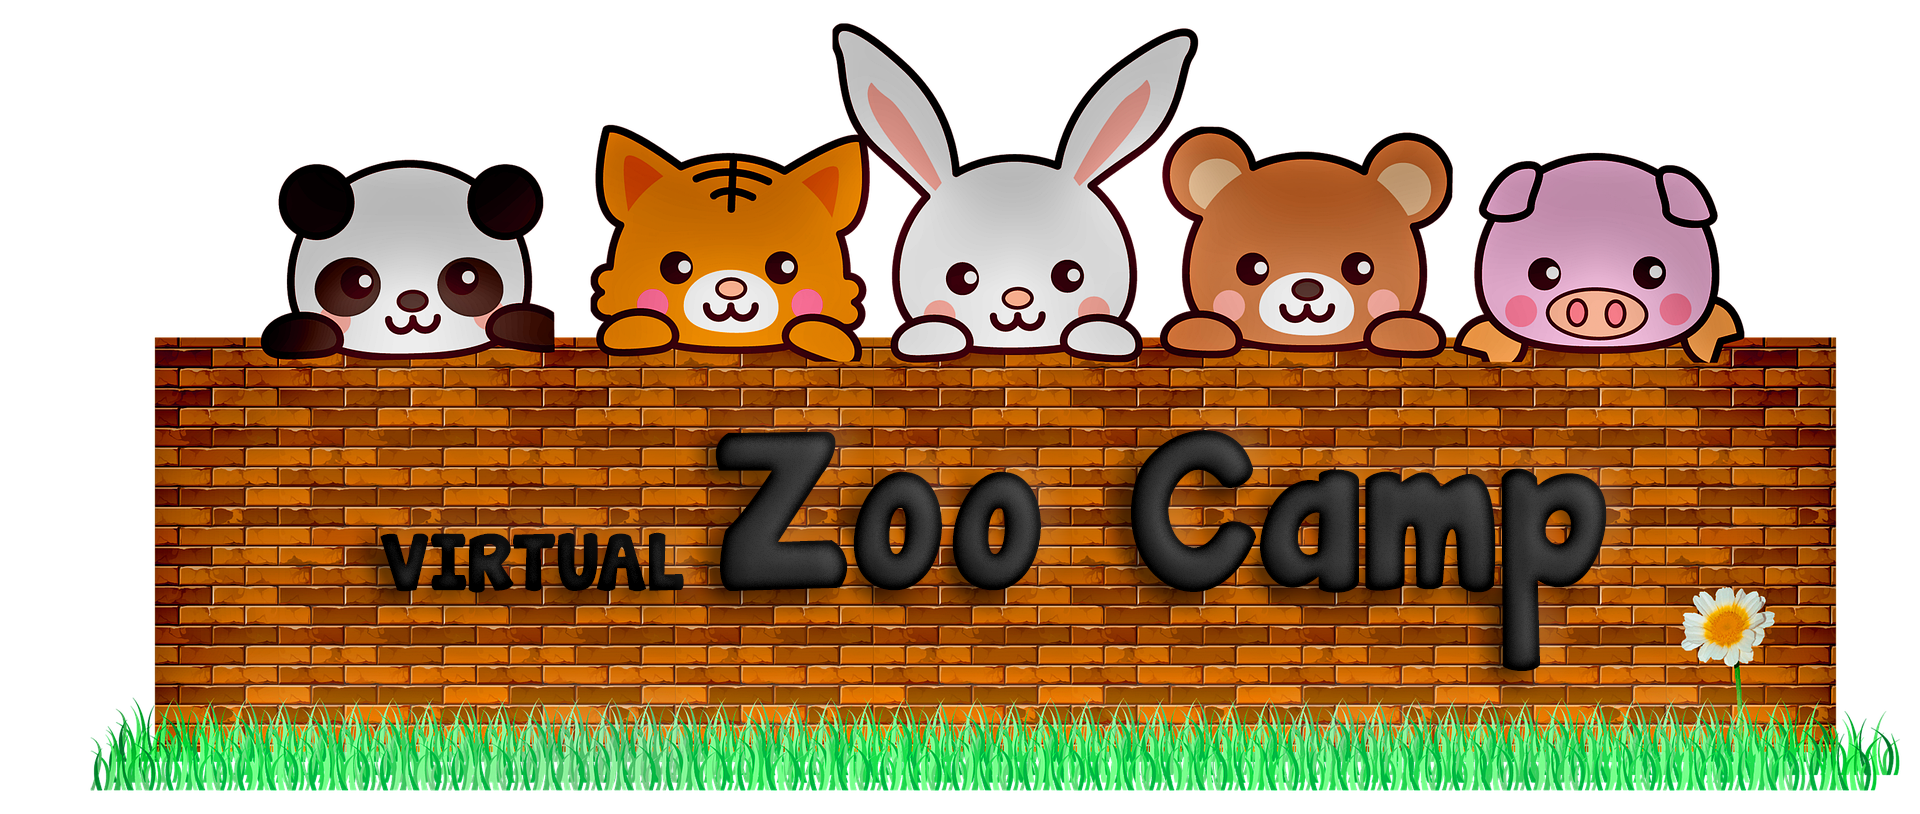 Panda, Cat, Rabbit, Bear and Pig on a Brick Wall with the words "Virtual Zoo Camp" on the brick wall